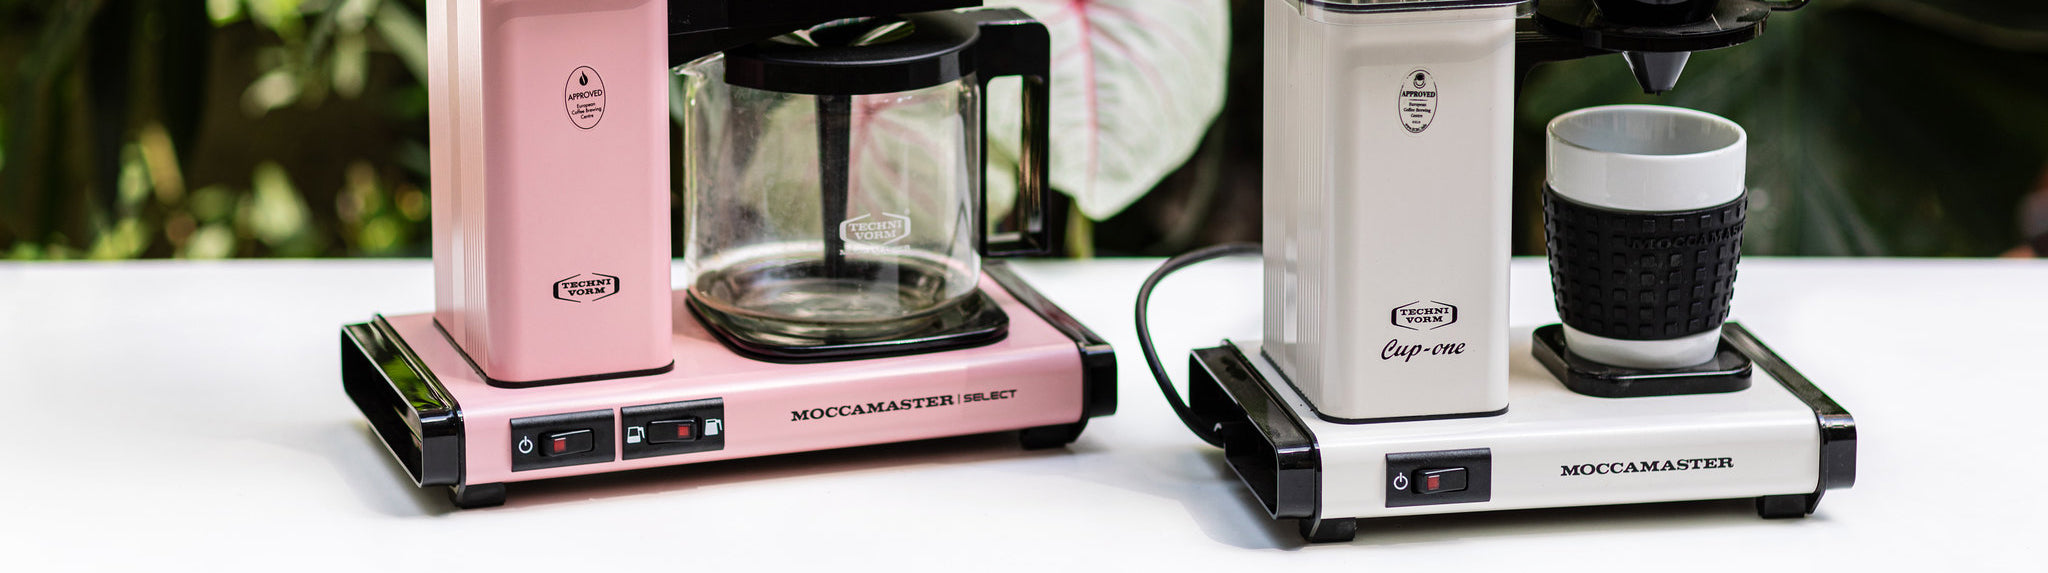 Moccamaster Filter Coffee Machines